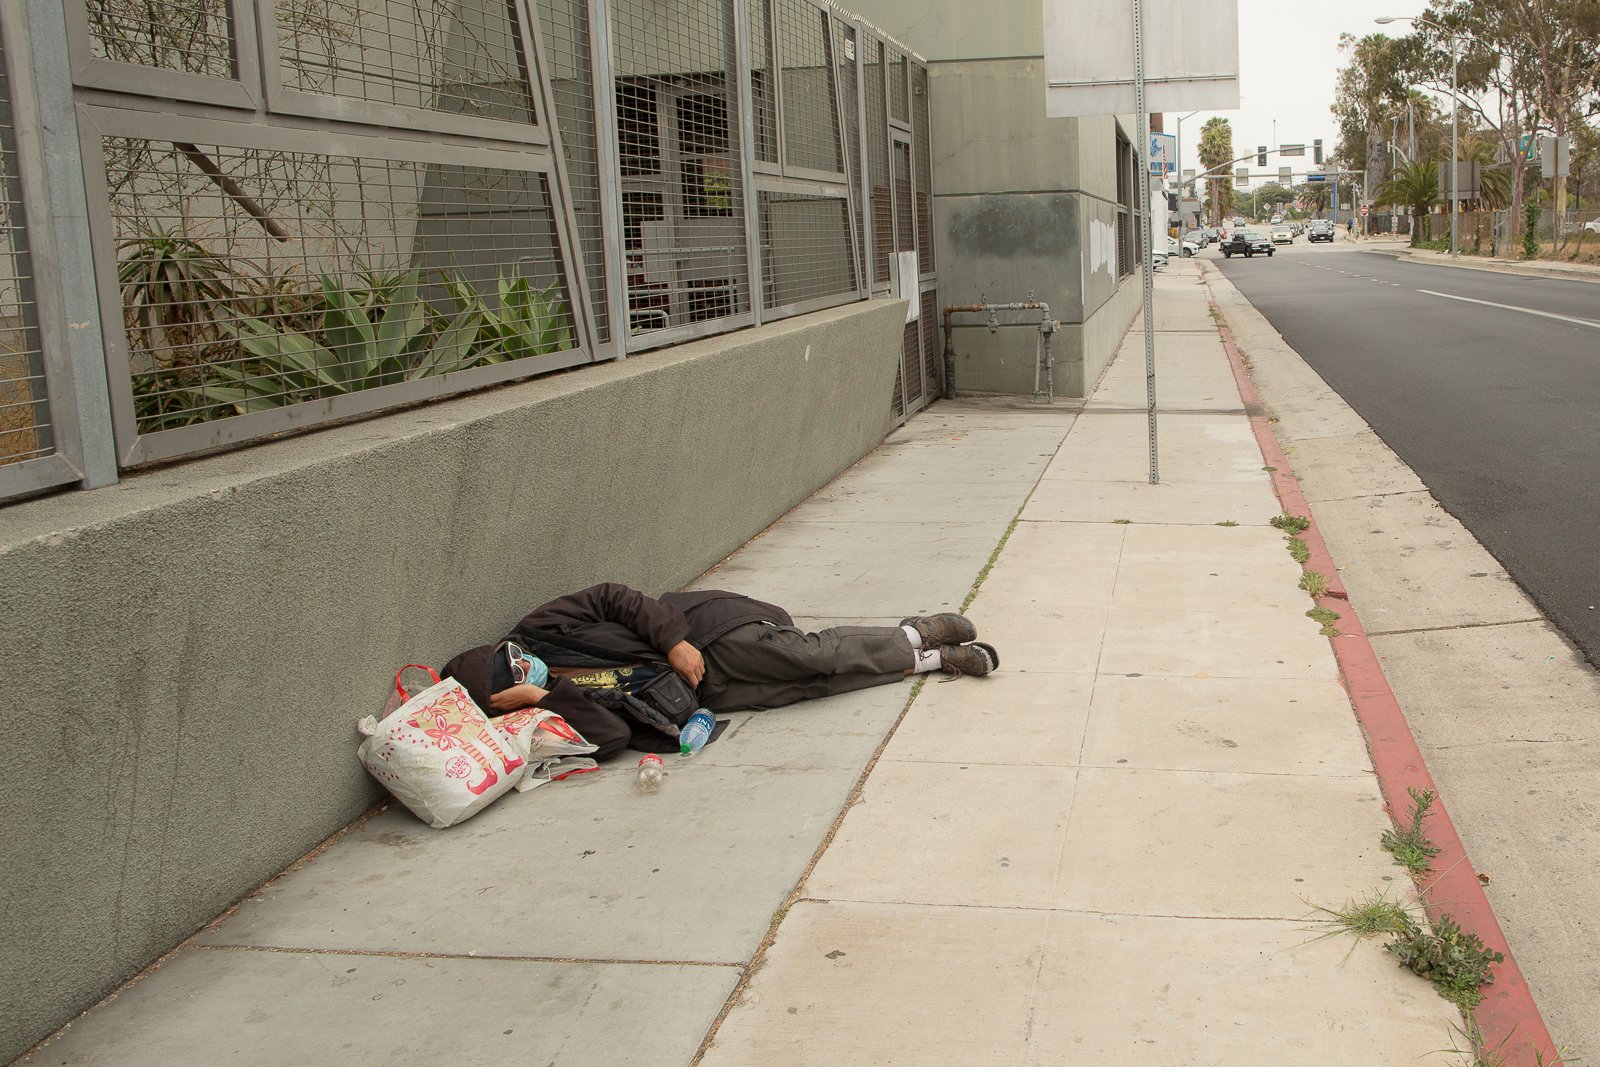 A man sleeping on the sidewalk , next to a new looking building